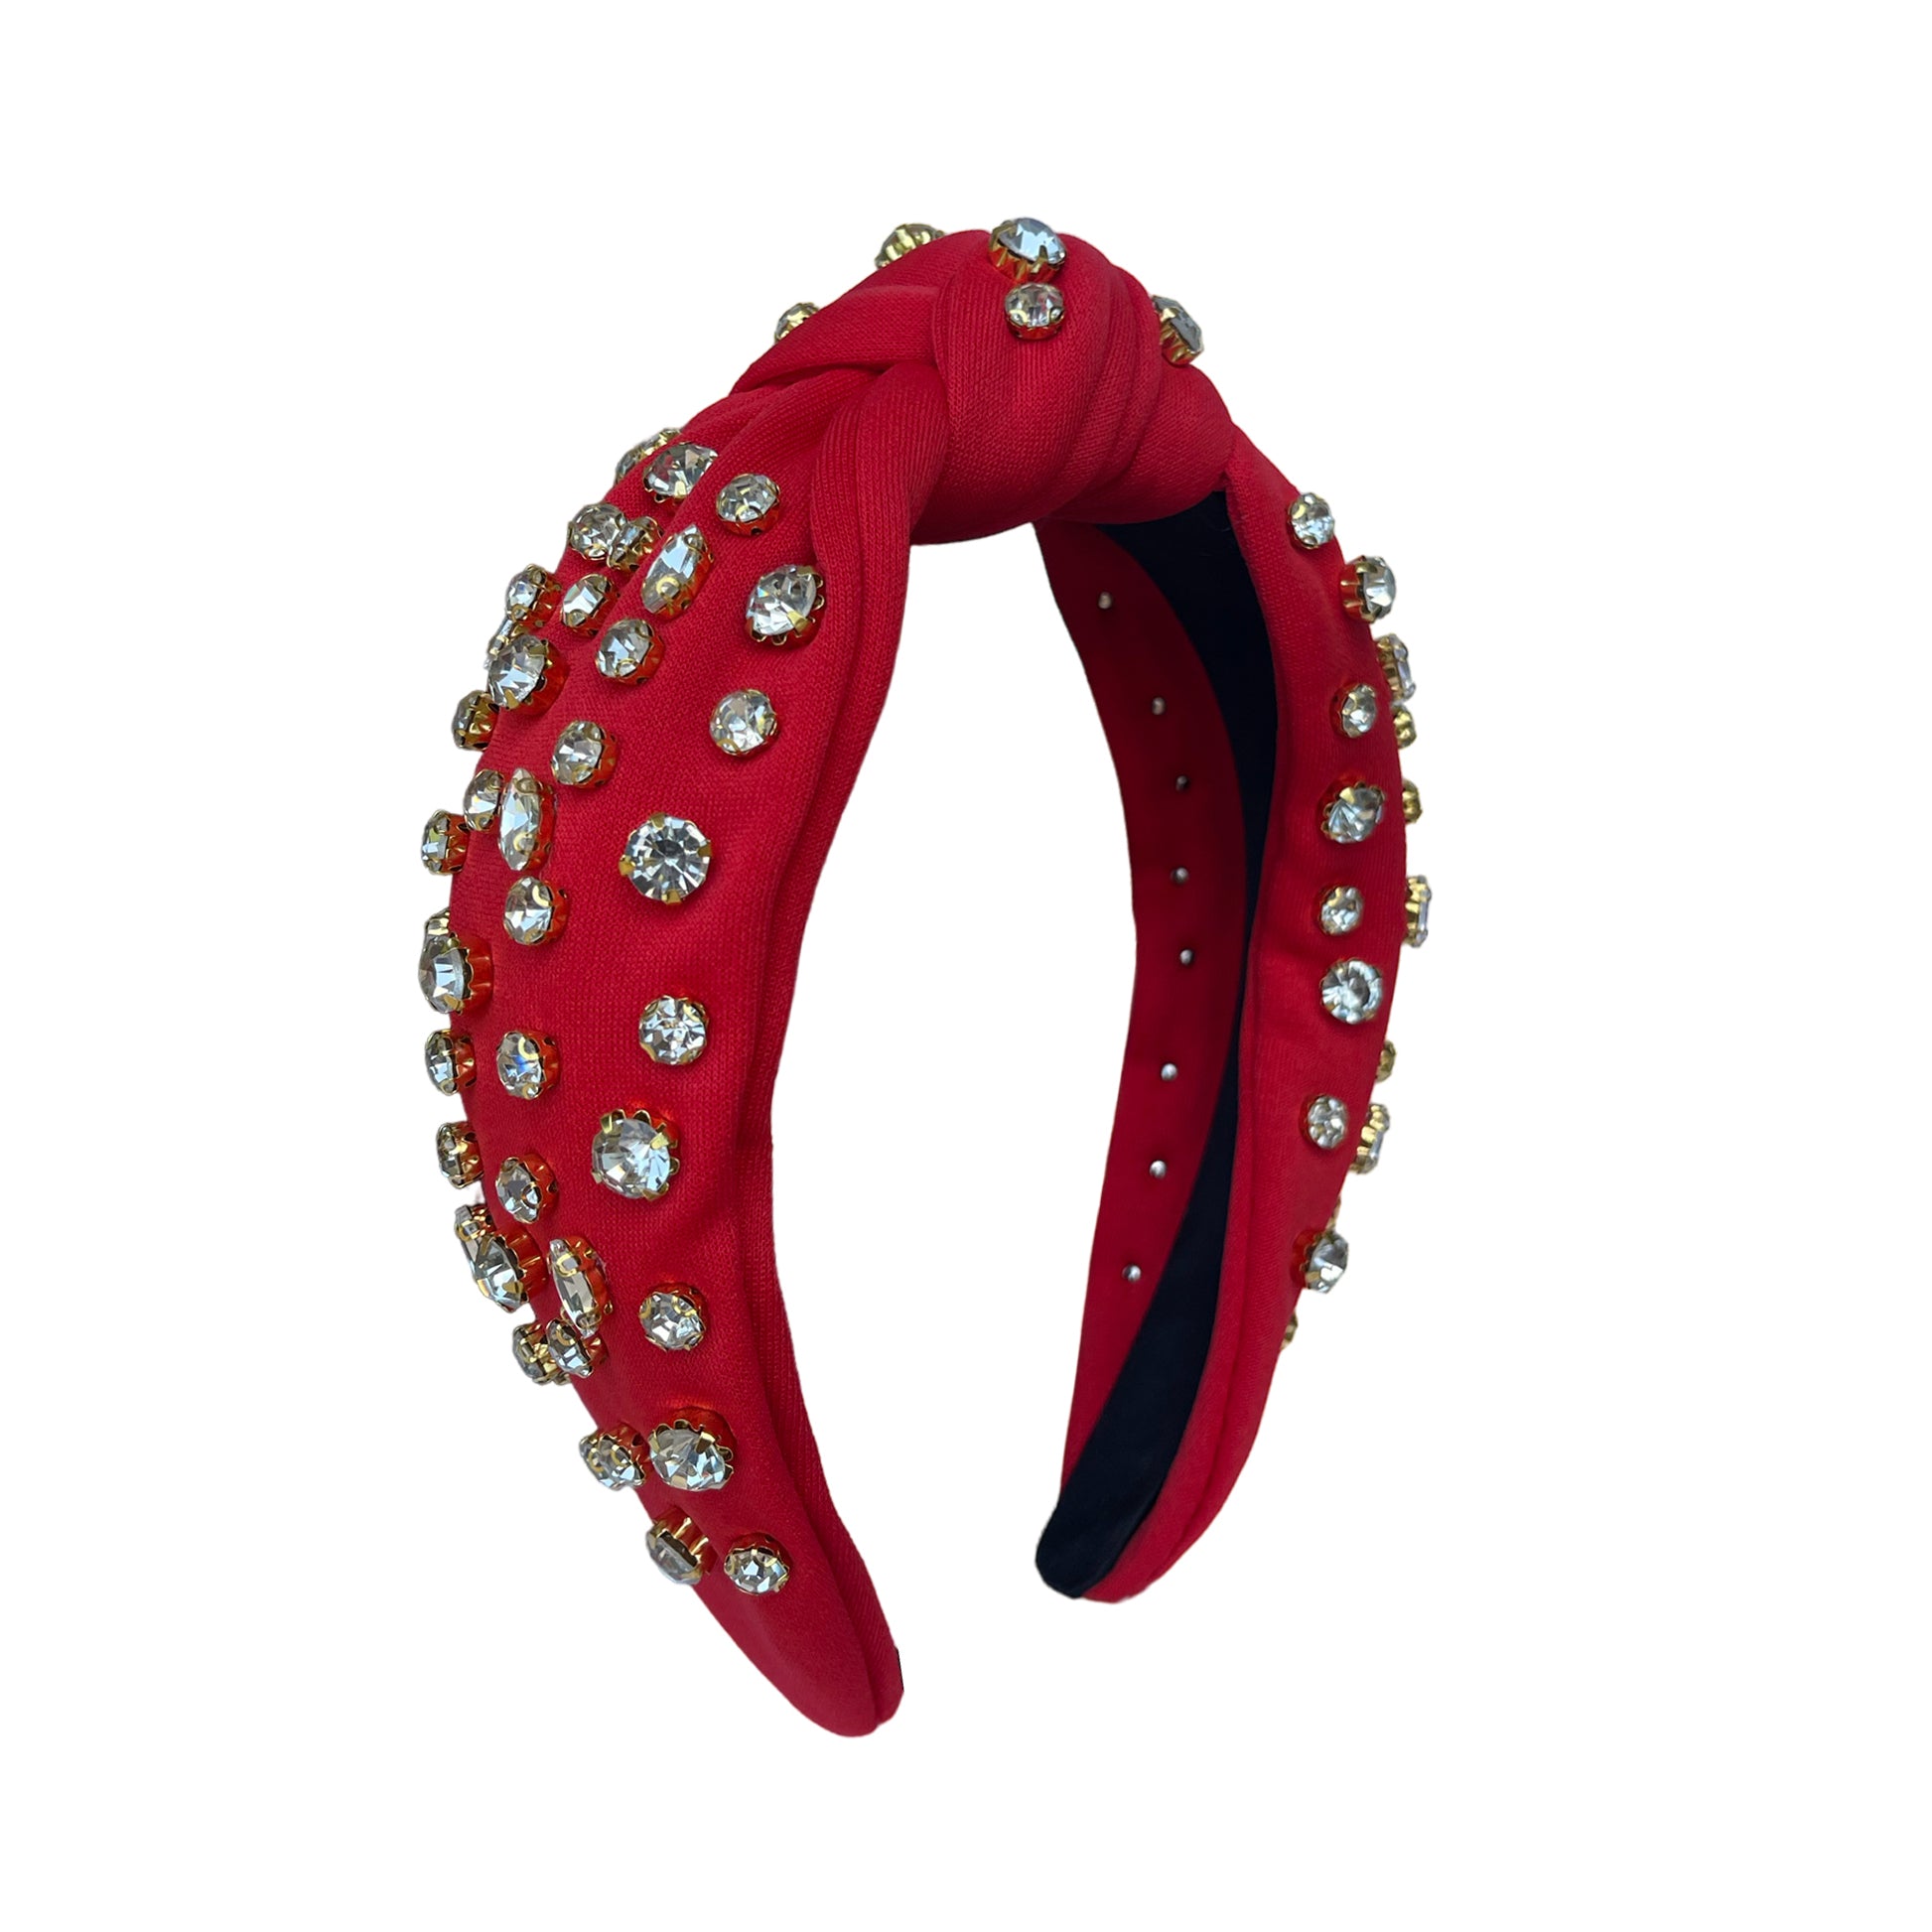 HB-9213 Clear Top Knot Headband Red